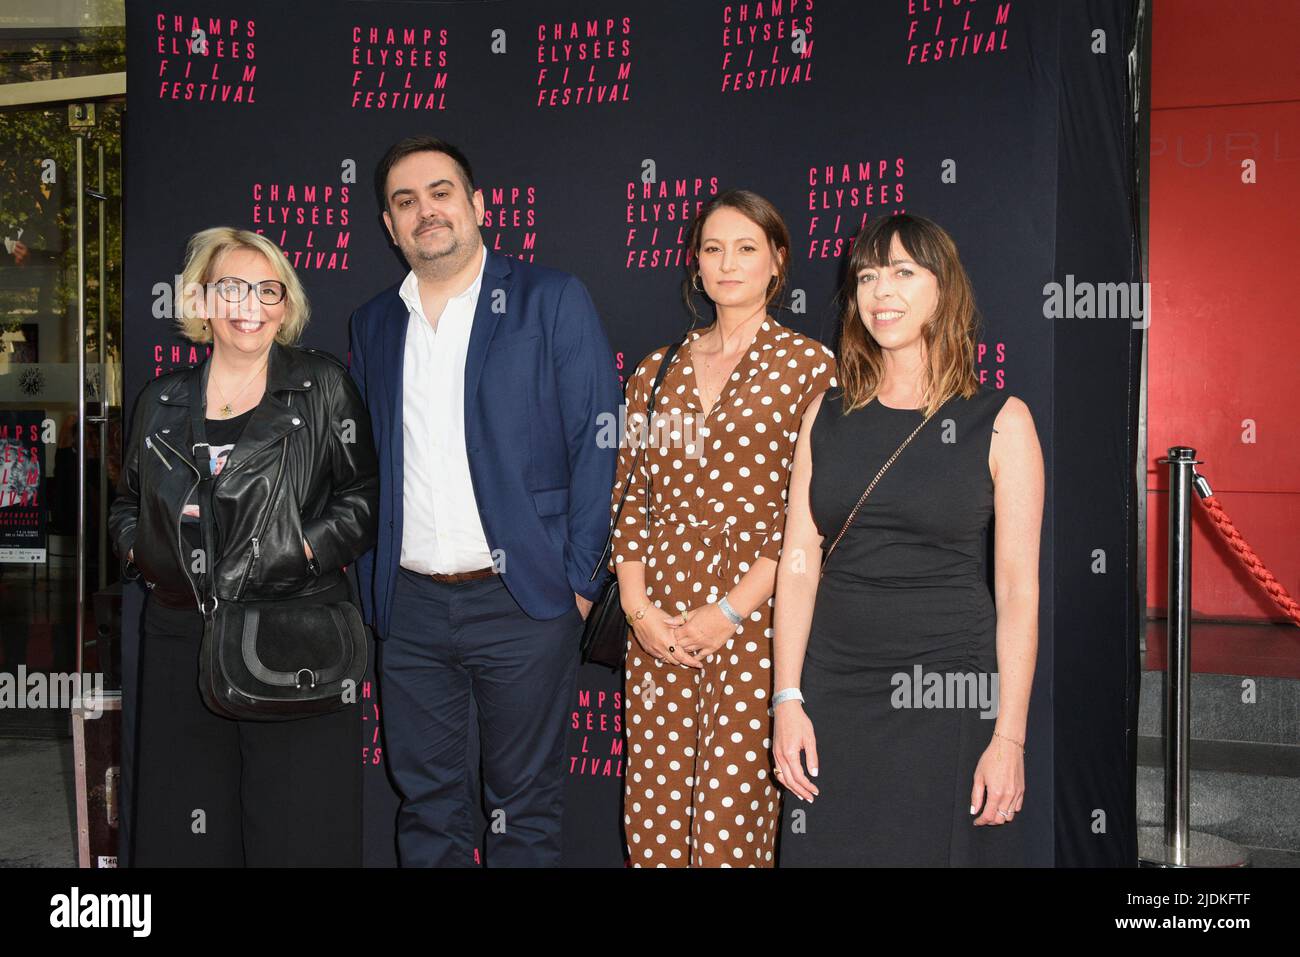 Paris, France, on June 21, 2022. Marie Sauvion, Renan Cros, Juliette Reitzer and Pascaline Potdevin (Members of the press jury) arriving to the Opening ceremony of the 11th edition of Champs Elysees Film Festival at Publicis cinema, in Paris, France, on June 21, 2022. Photo by Mireille Ampilhac/ABACAPRESS.COM Stock Photo